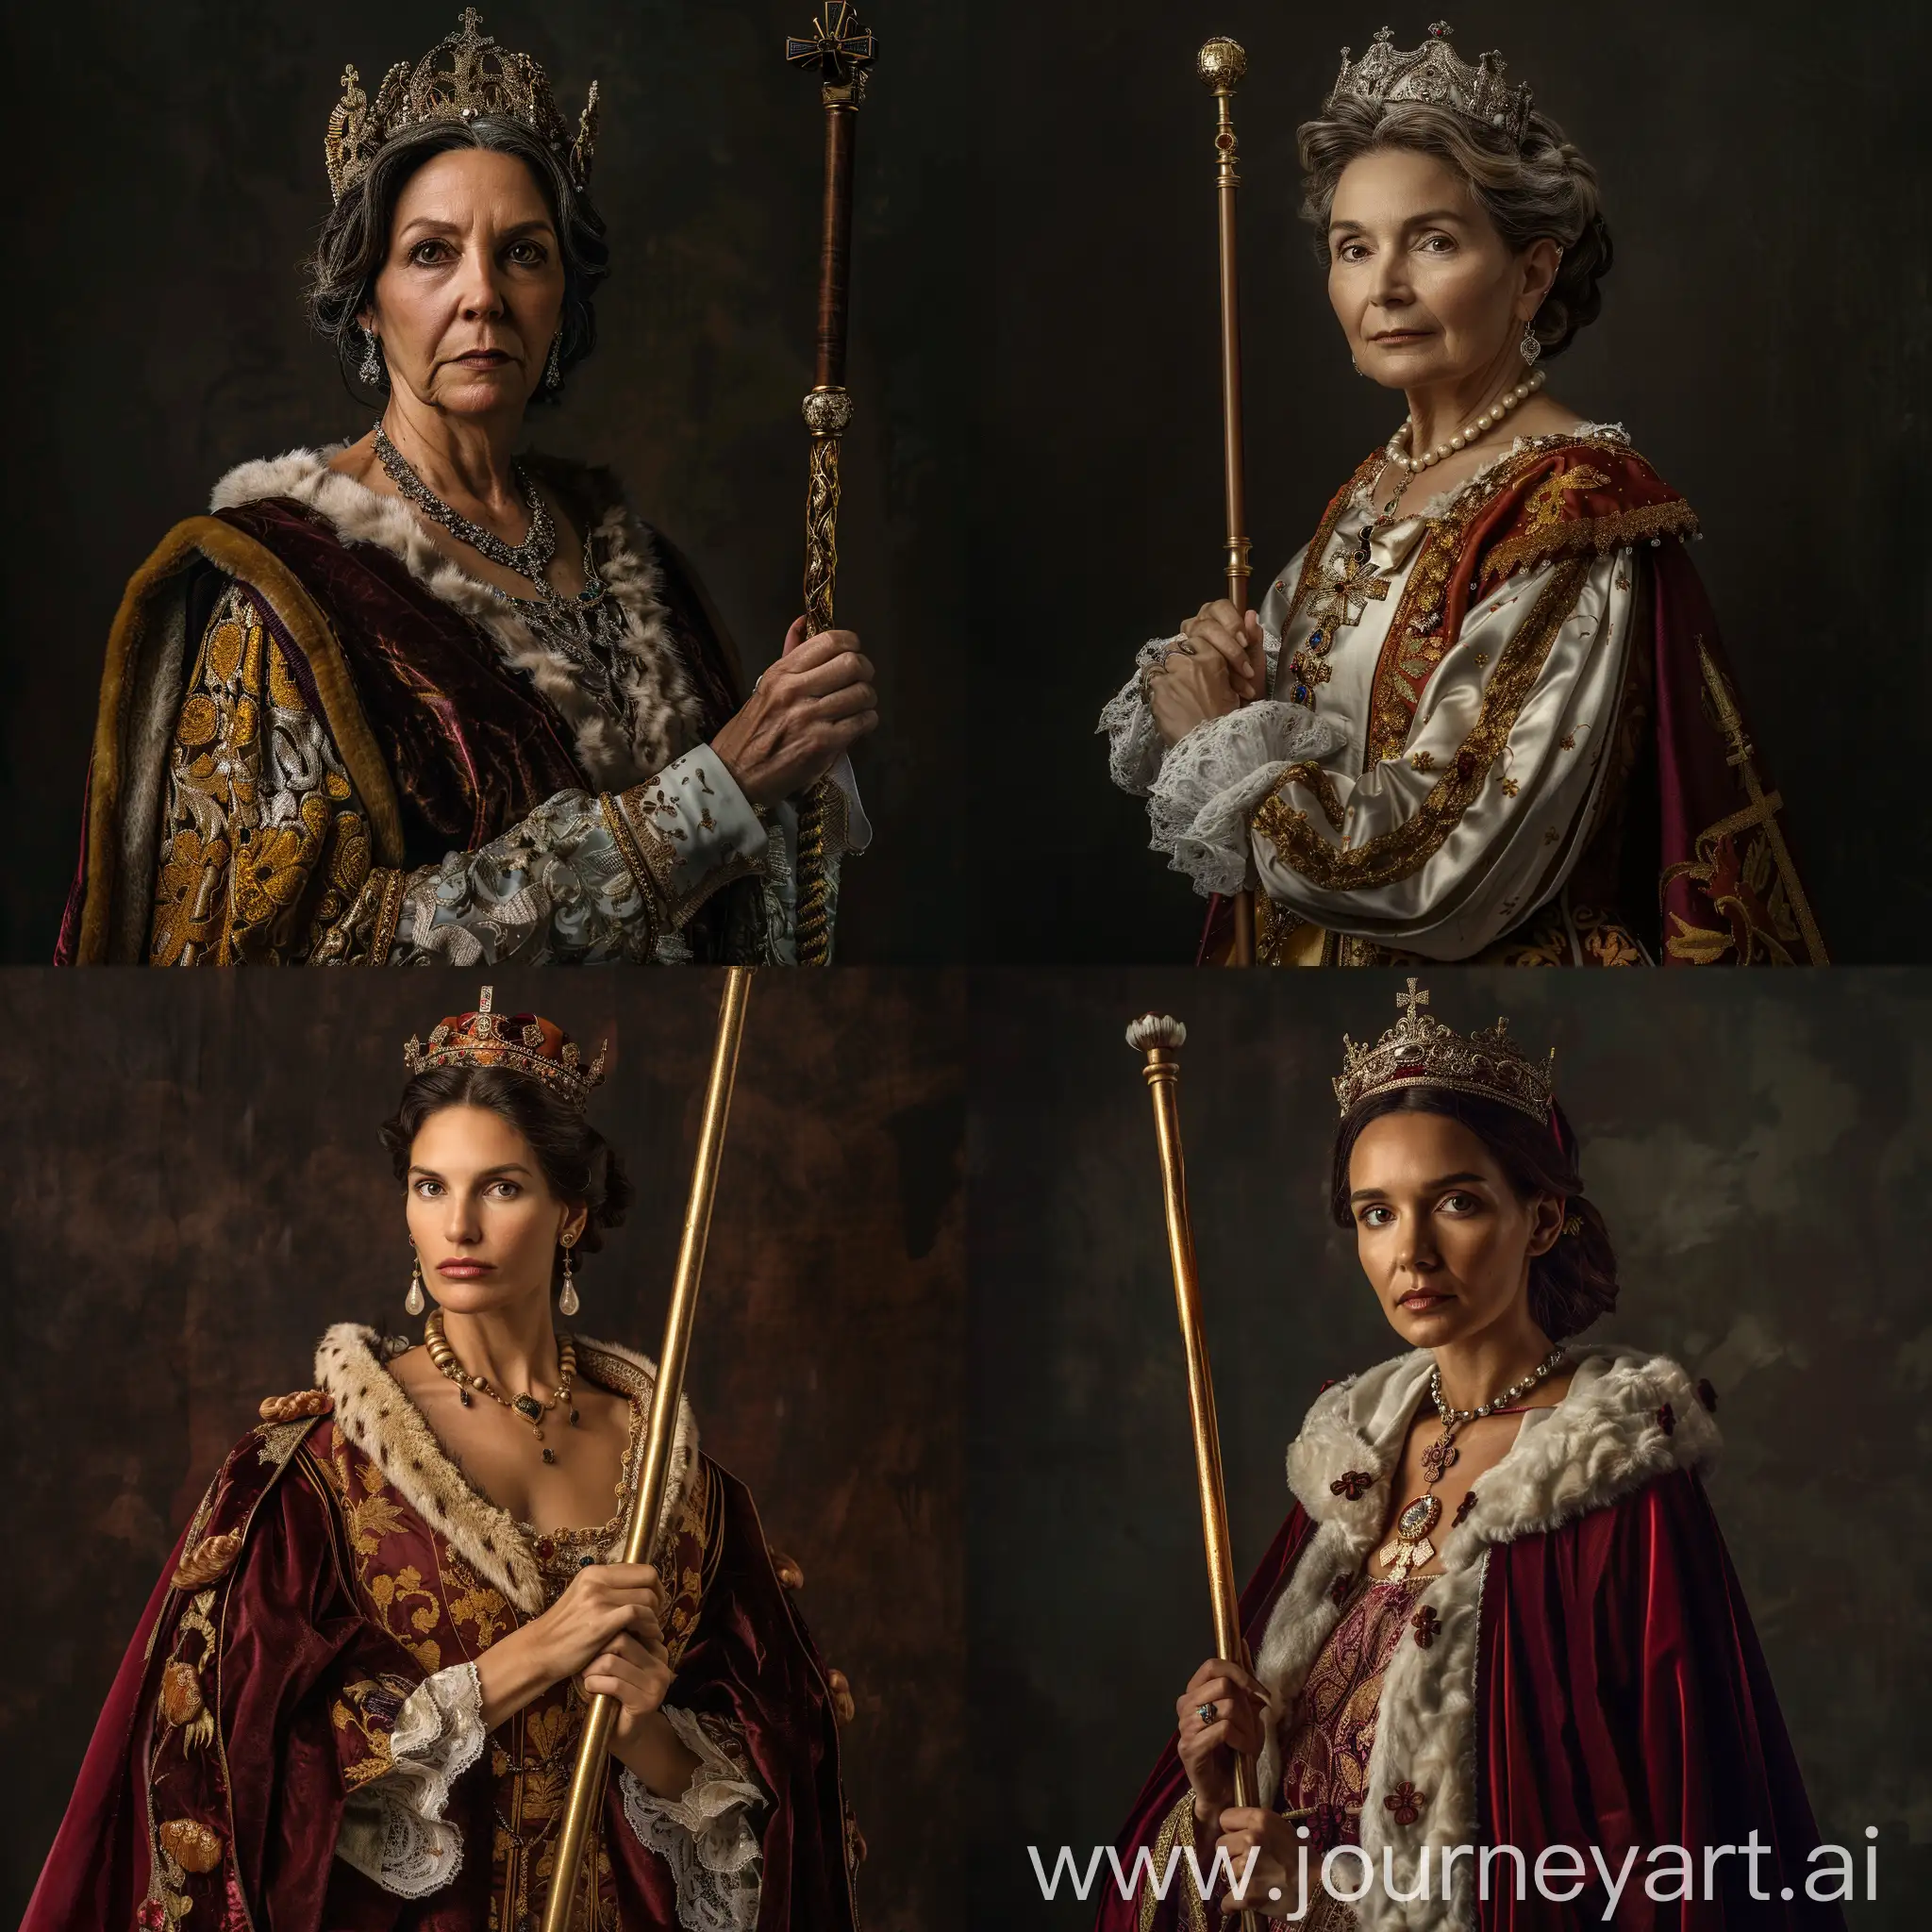 Queen-Isabella-of-Castile-Poses-Regally-with-Noble-Rod-in-Cinematic-Lighting